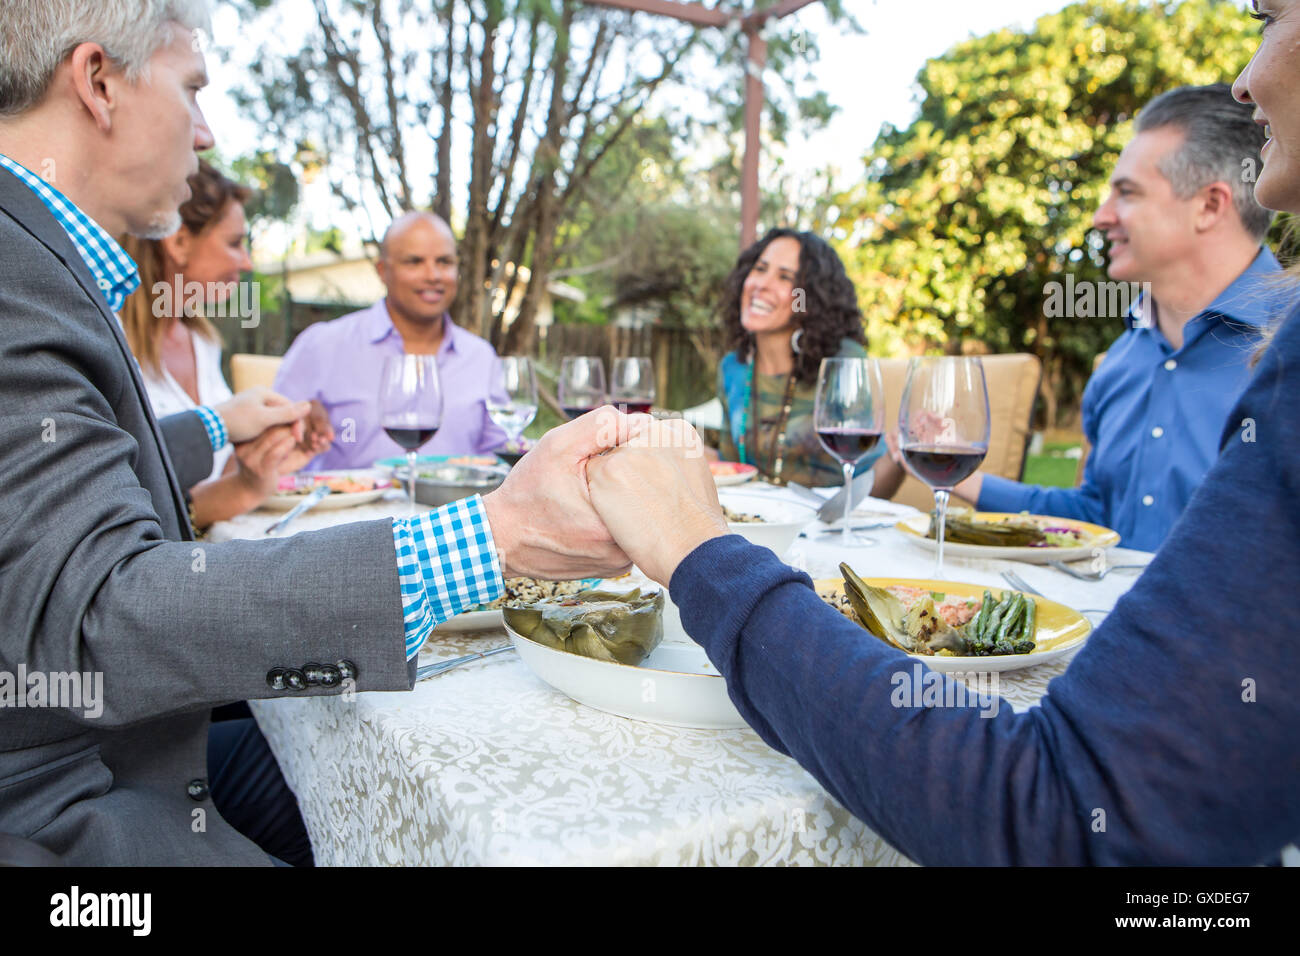 Six mature adult friends holding each others hands at garden party table Stock Photo